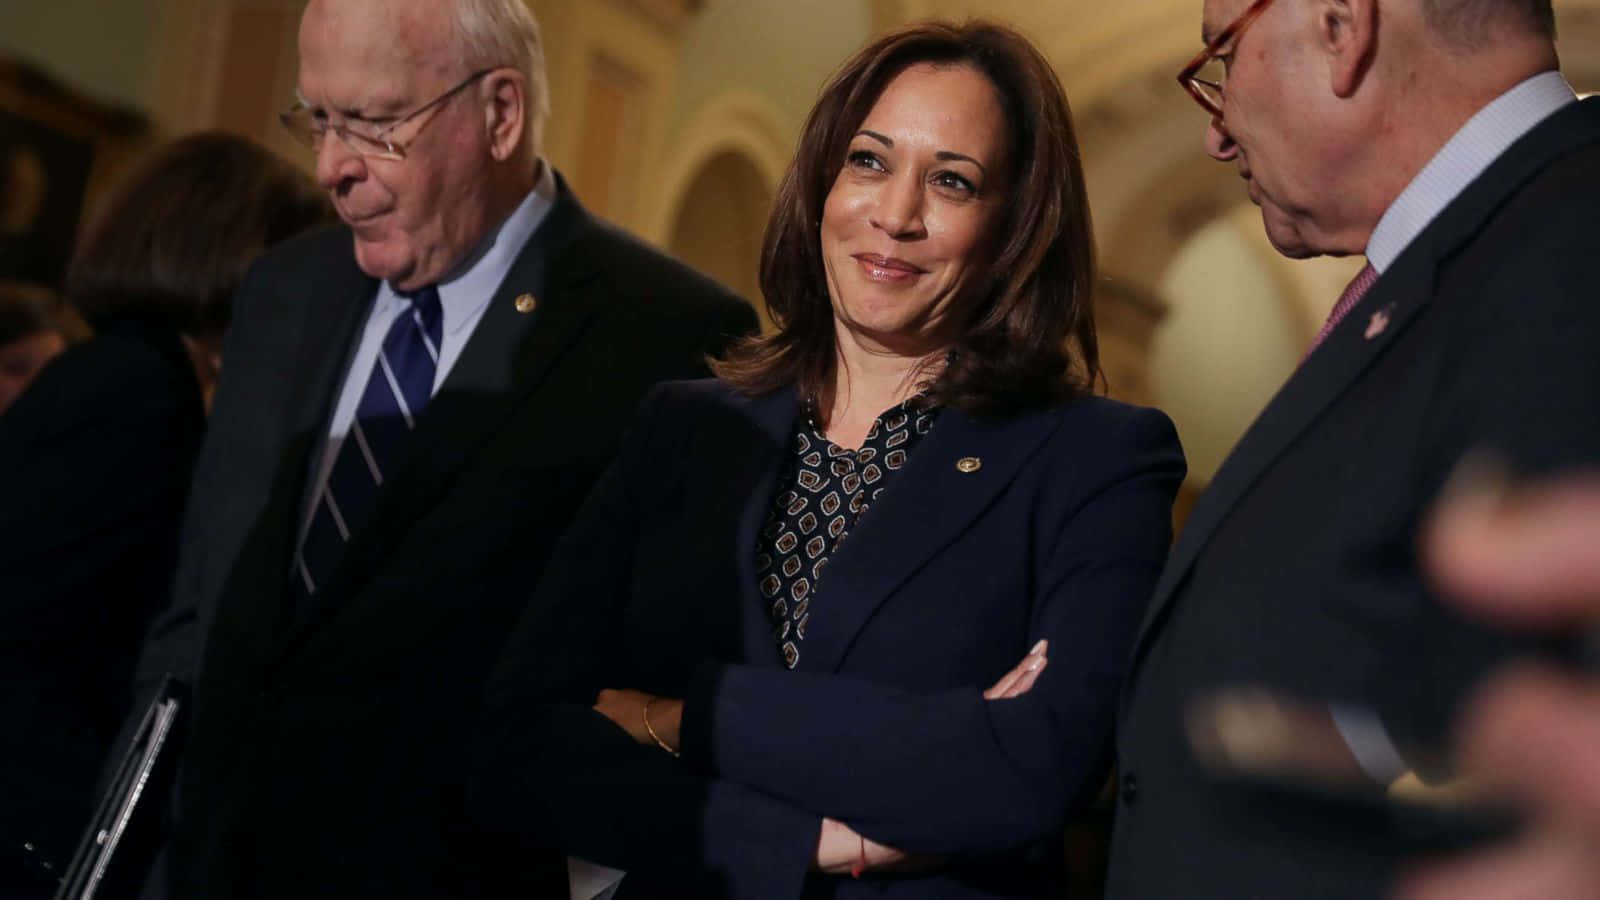 Kamala Harris, Vice President of the United States poses in a formal portrait